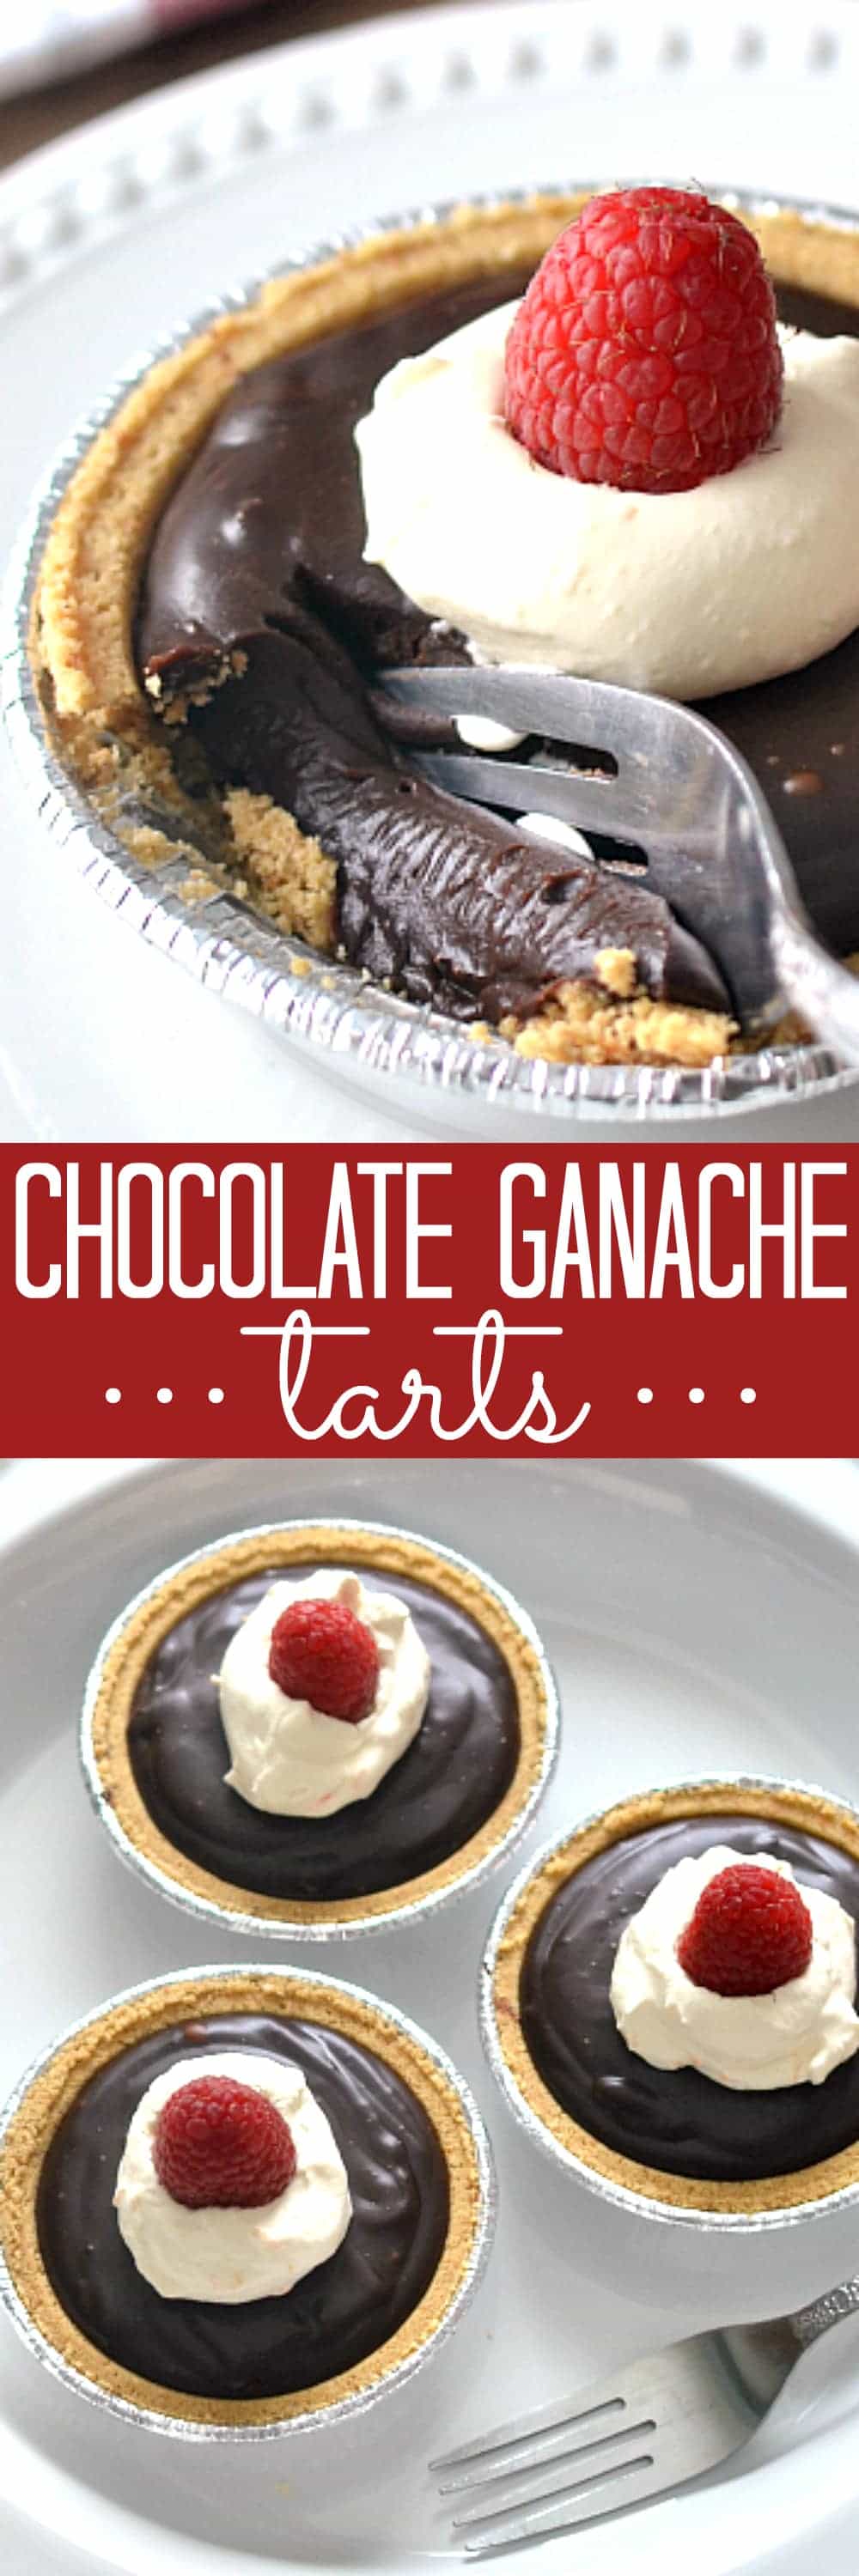  Rich Chocolate Ganache Tarts topped with fresh orange whipped cream  and raspberries. Simple, elegant, and so incredibly decadent!!